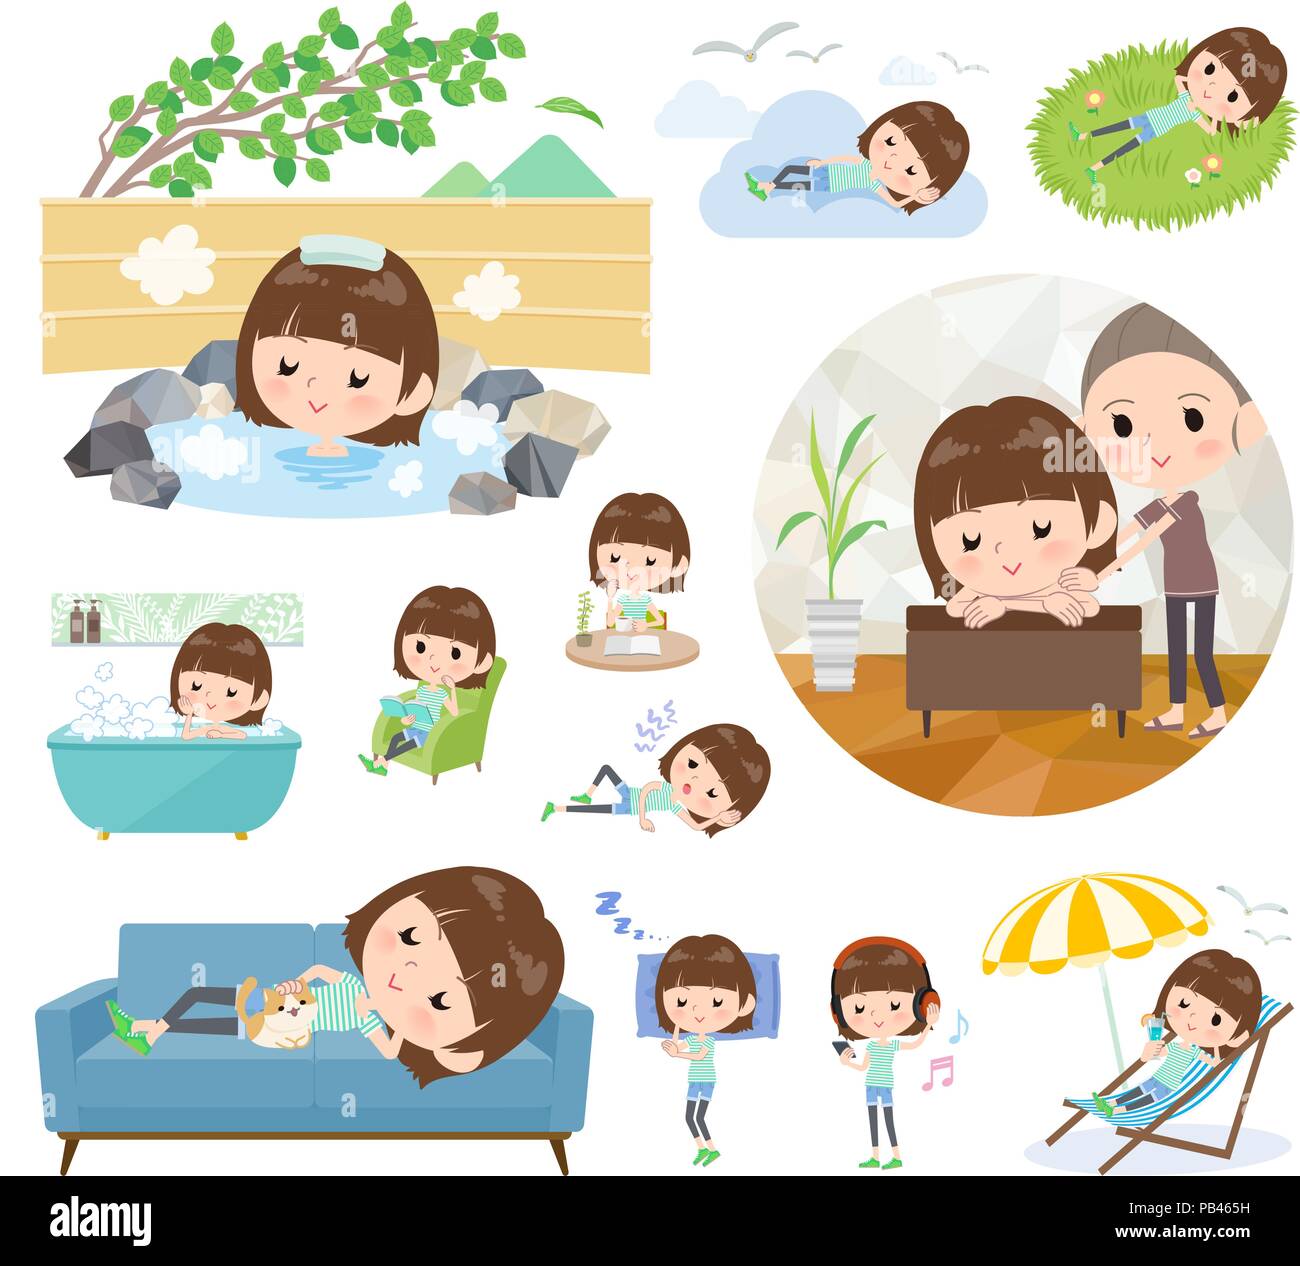 A set of women about relaxing.There are actions such as vacation and stress relief.It's vector art so it's easy to edit. Stock Vector